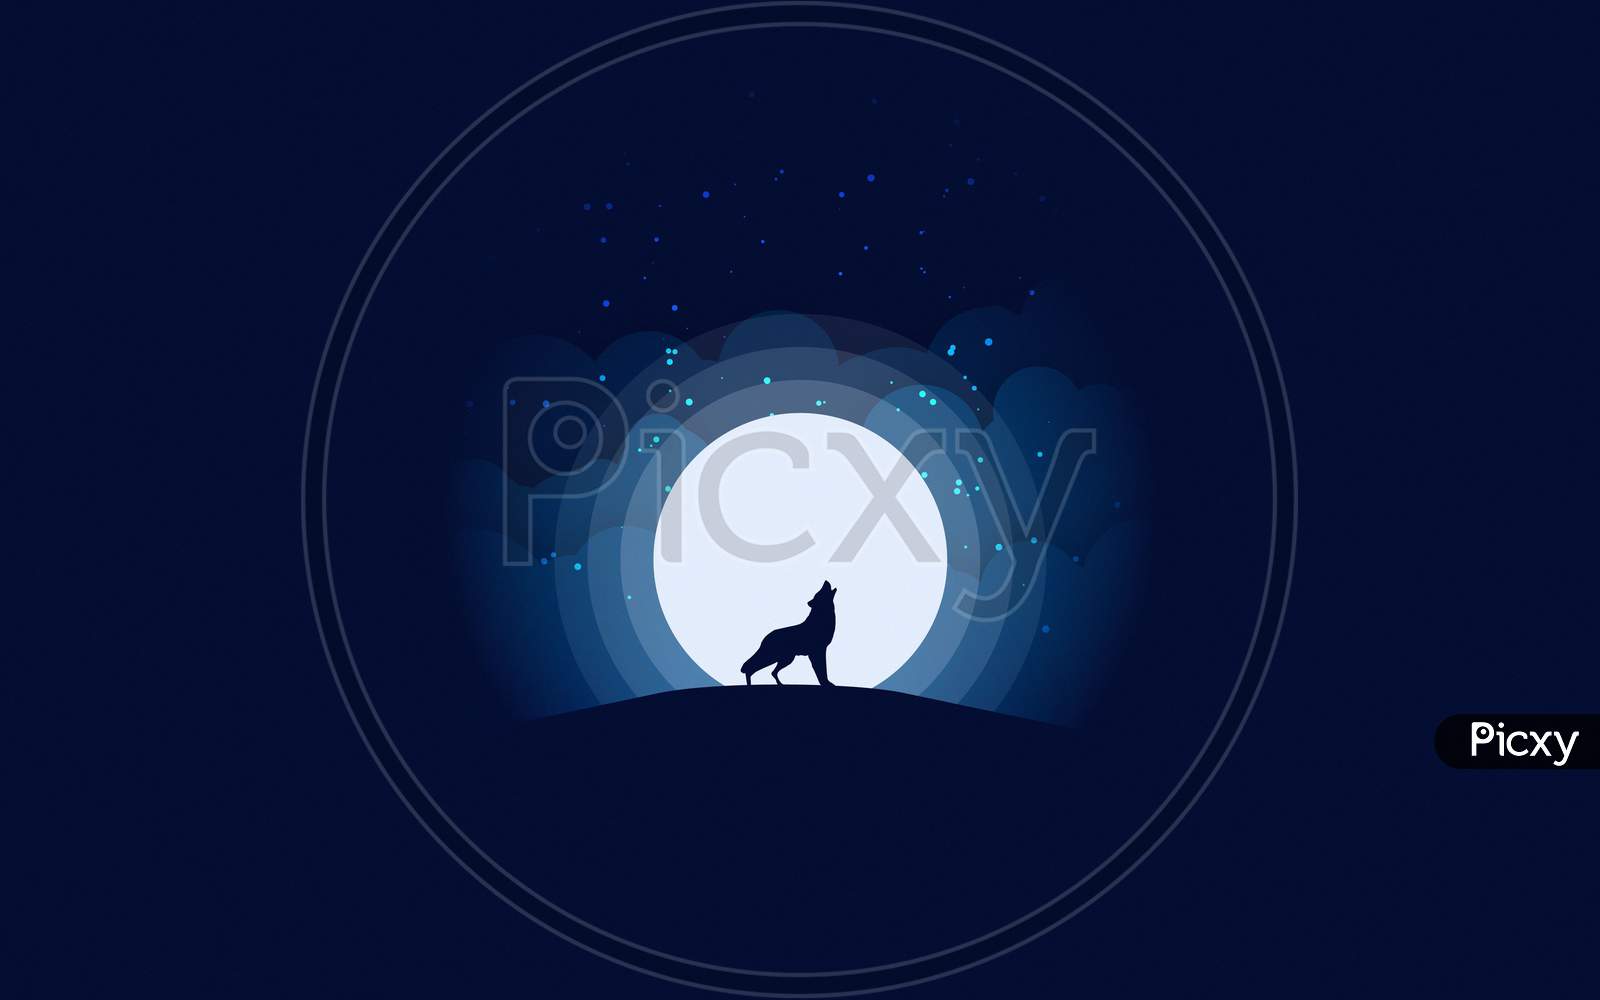 Digital Art Illustration Of An Howling Fox In The Cliff Besides Moon With Blue Background.